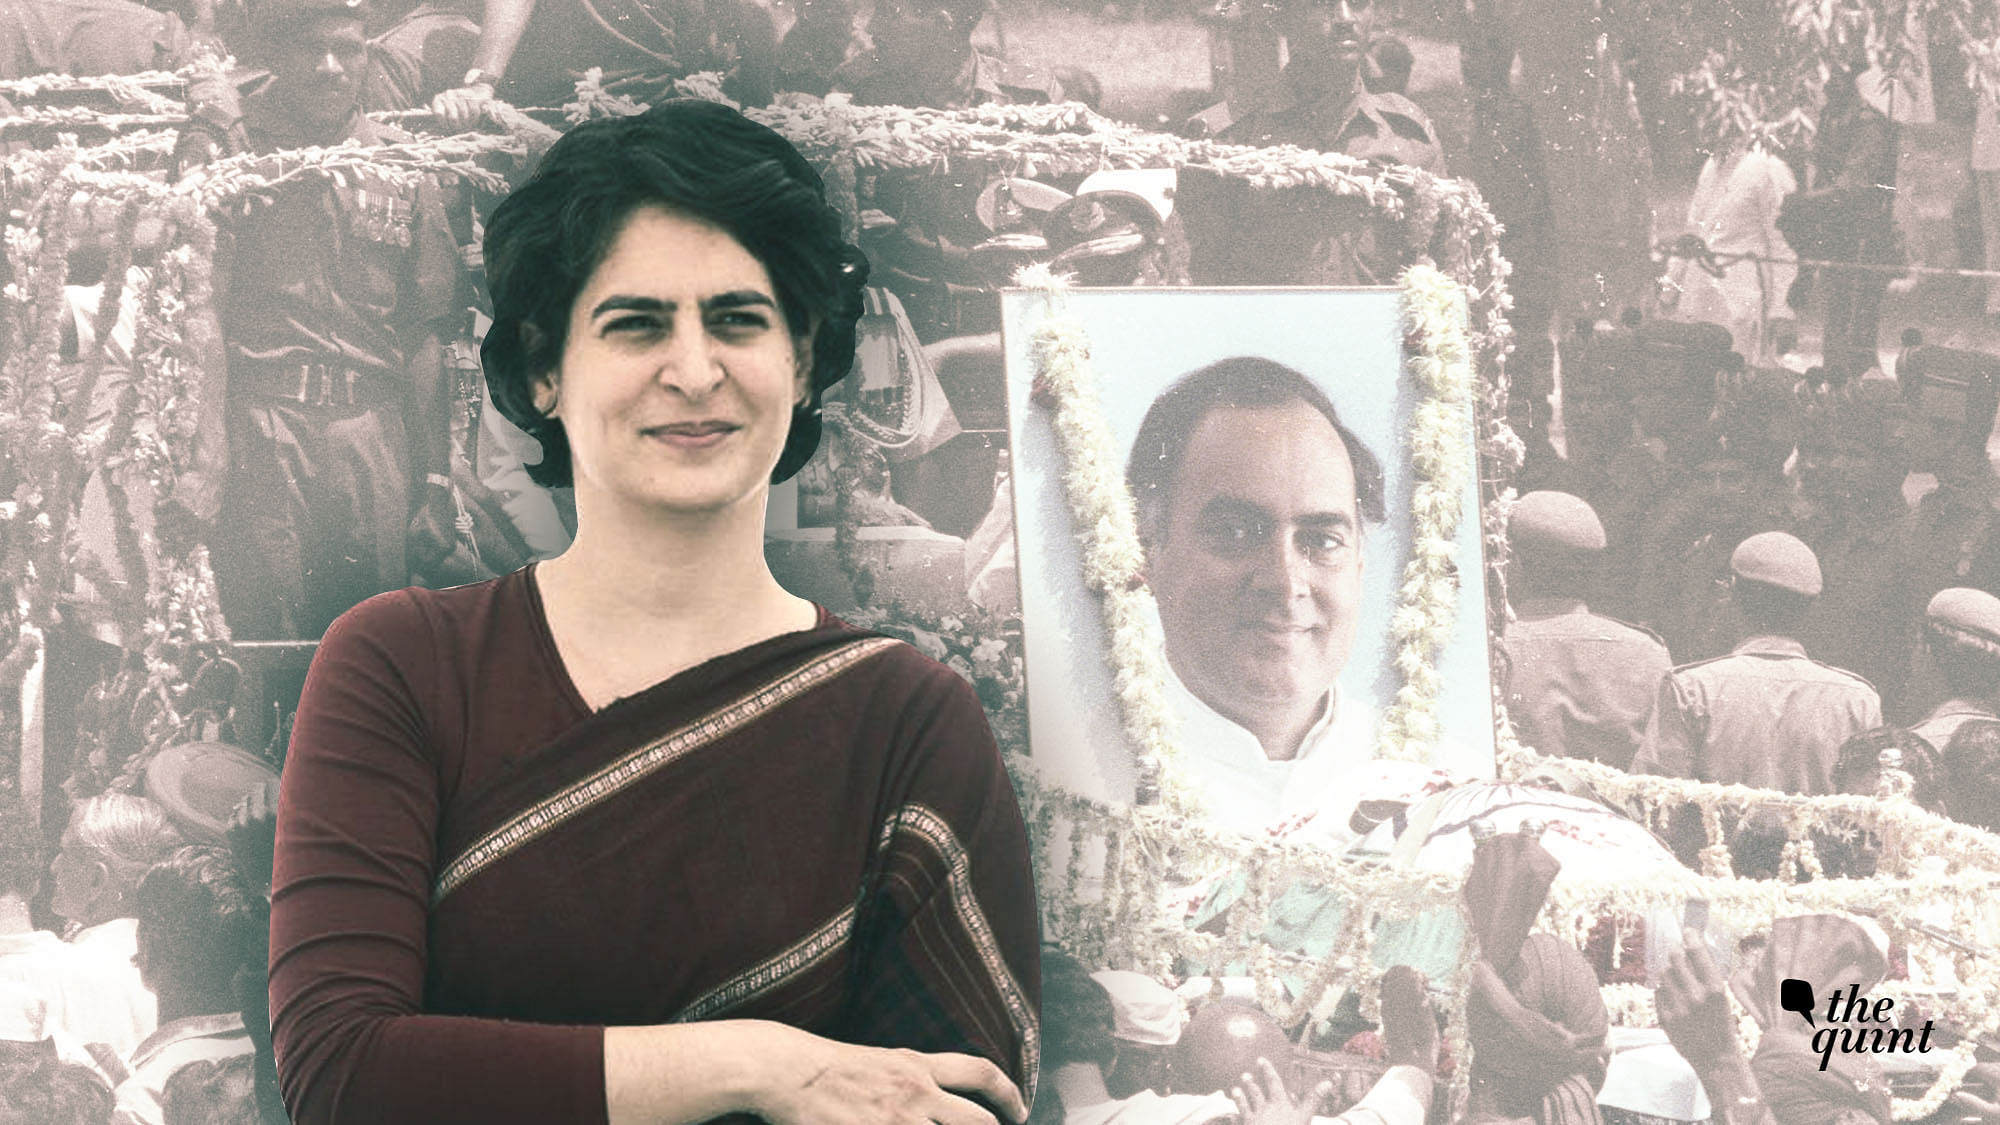 From a “furious” 19-year-old to a “forgiving daughter”, how Priyanka Gandhi accepted her father, Rajiv Gandhi’s death.